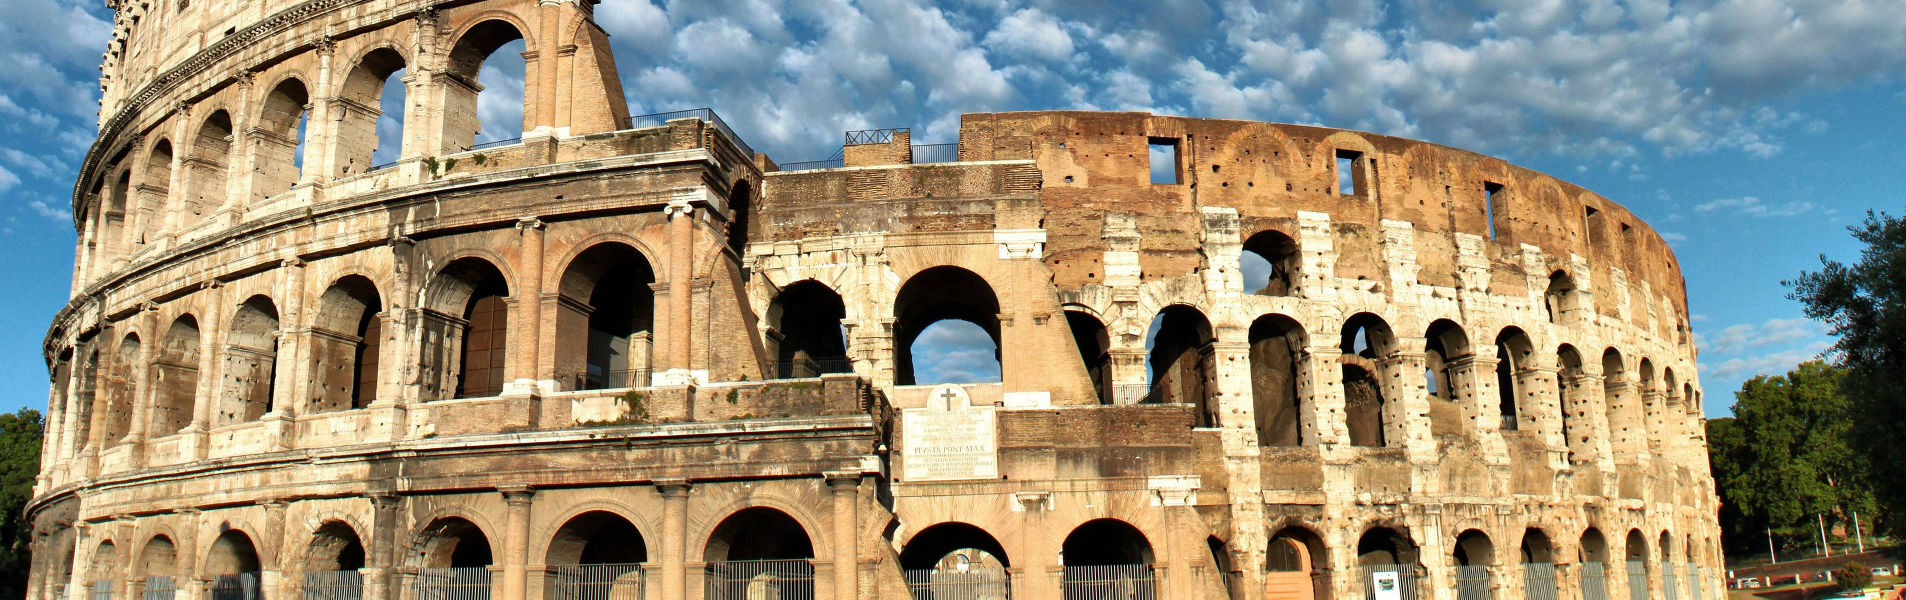 The Colosseum, 2,000 years of history in the heart of Rome